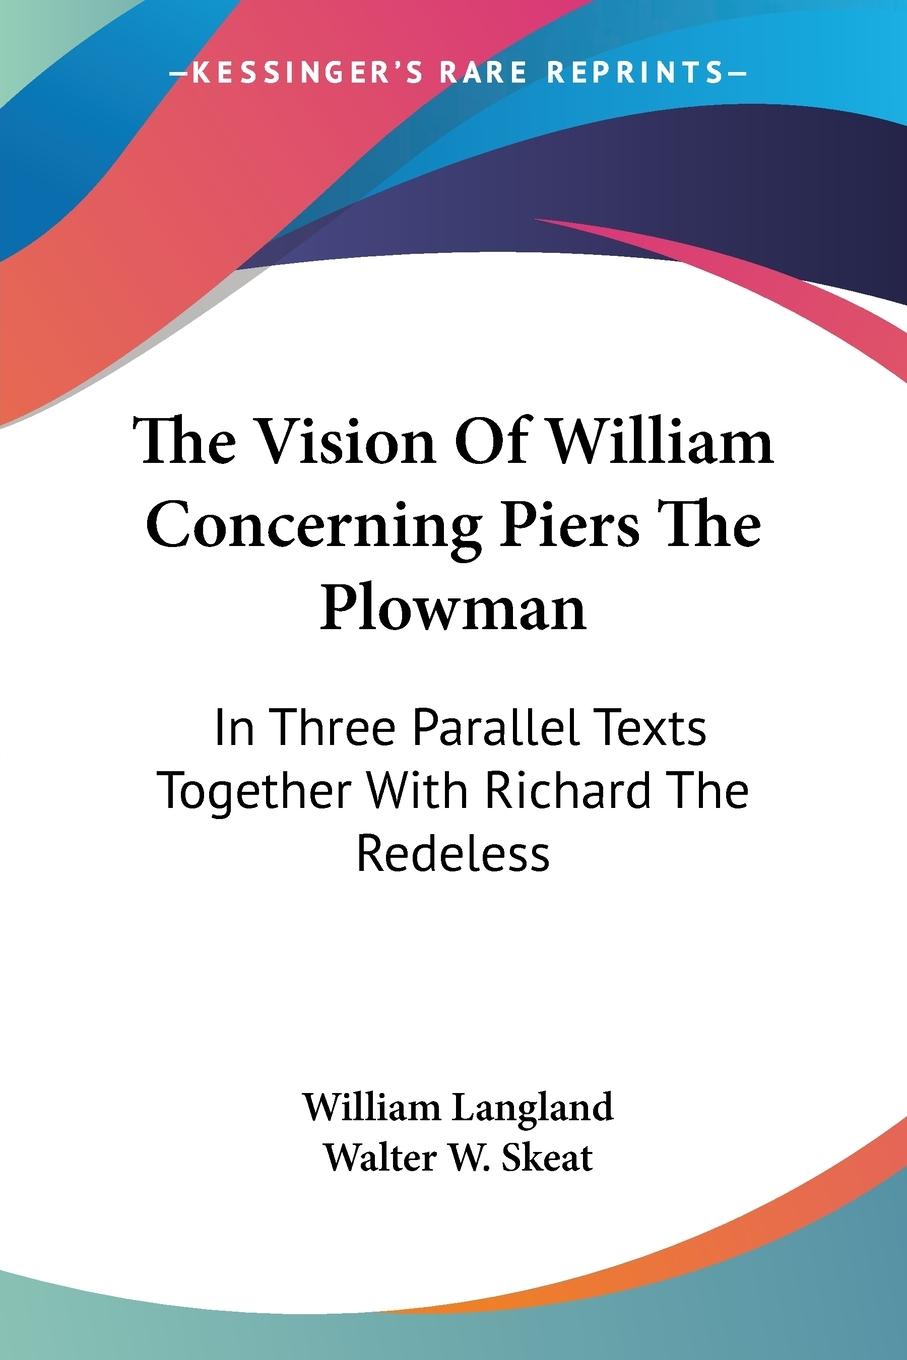 The Vision Of William Concerning Piers The Plowman - Langland, William